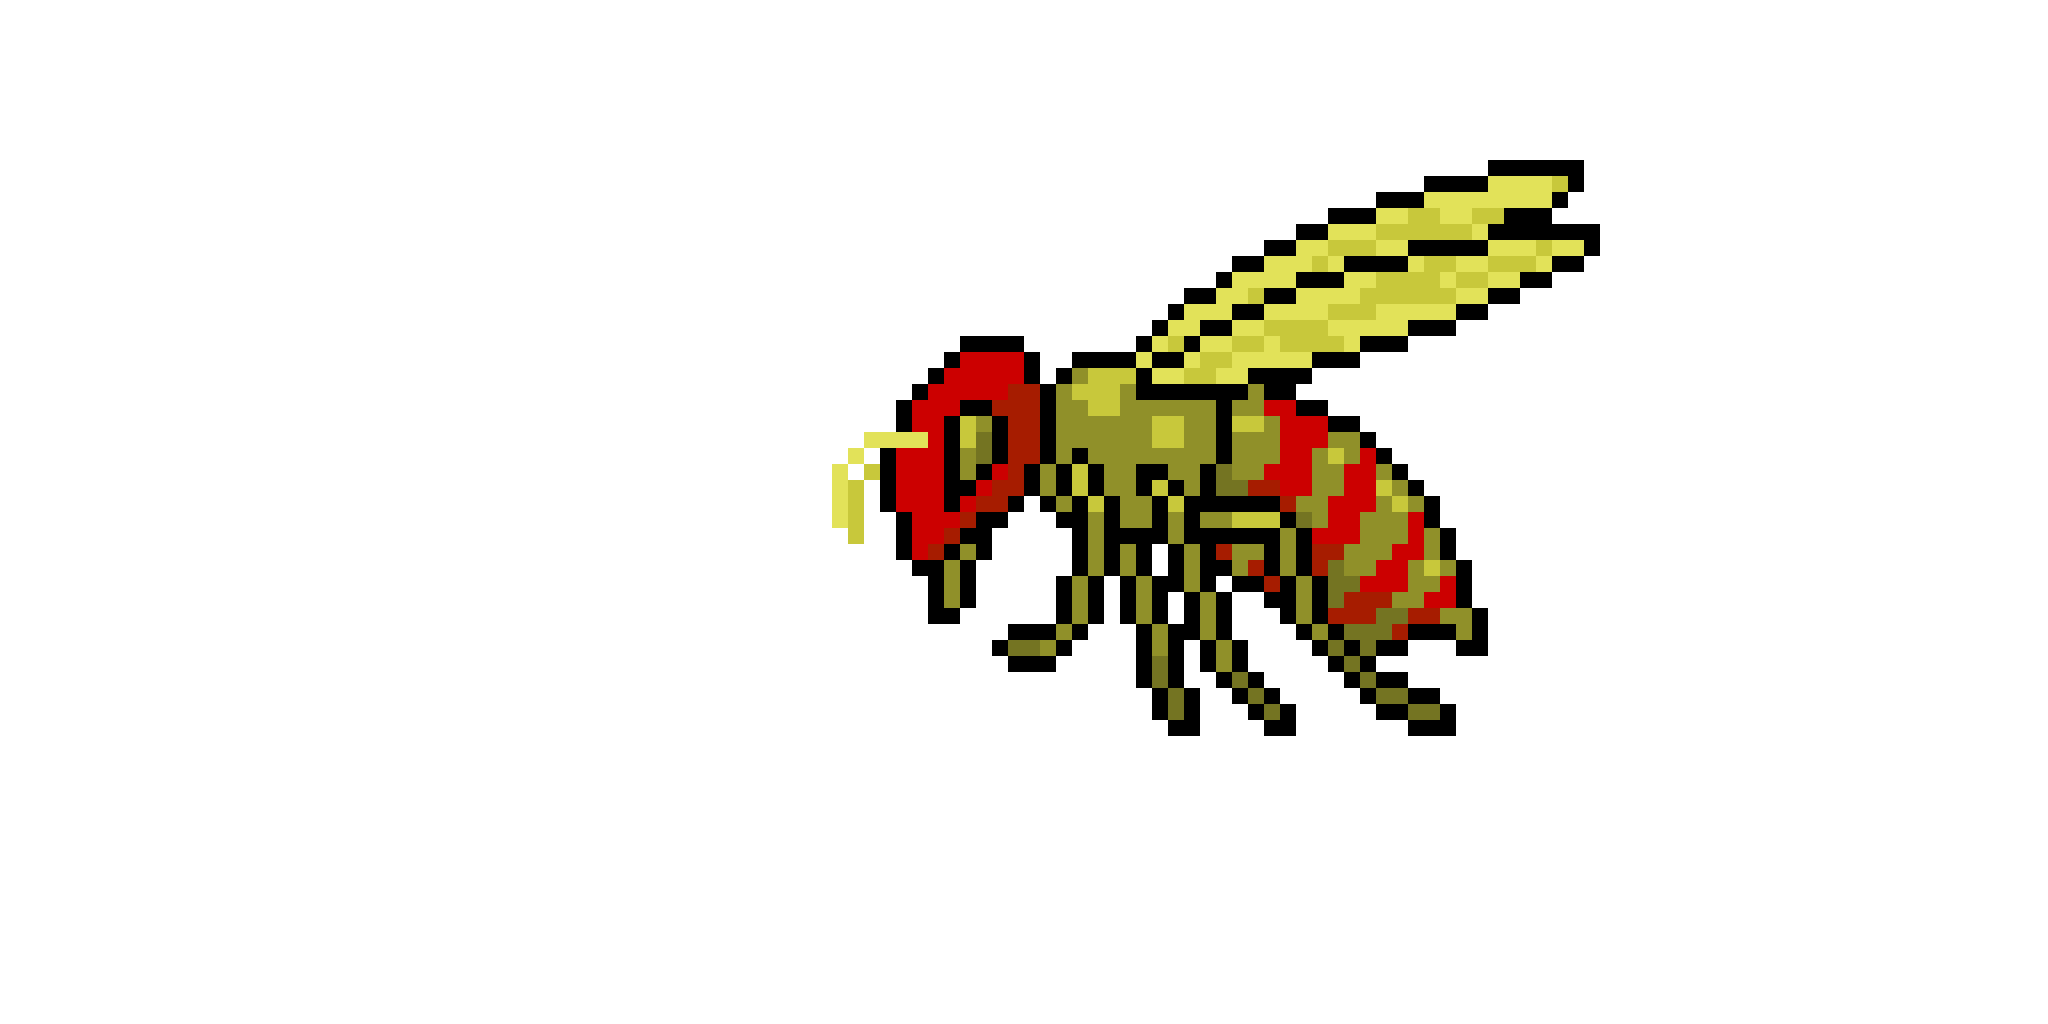 Remastered Wasp (Full credit to pixelman and mr_bugman